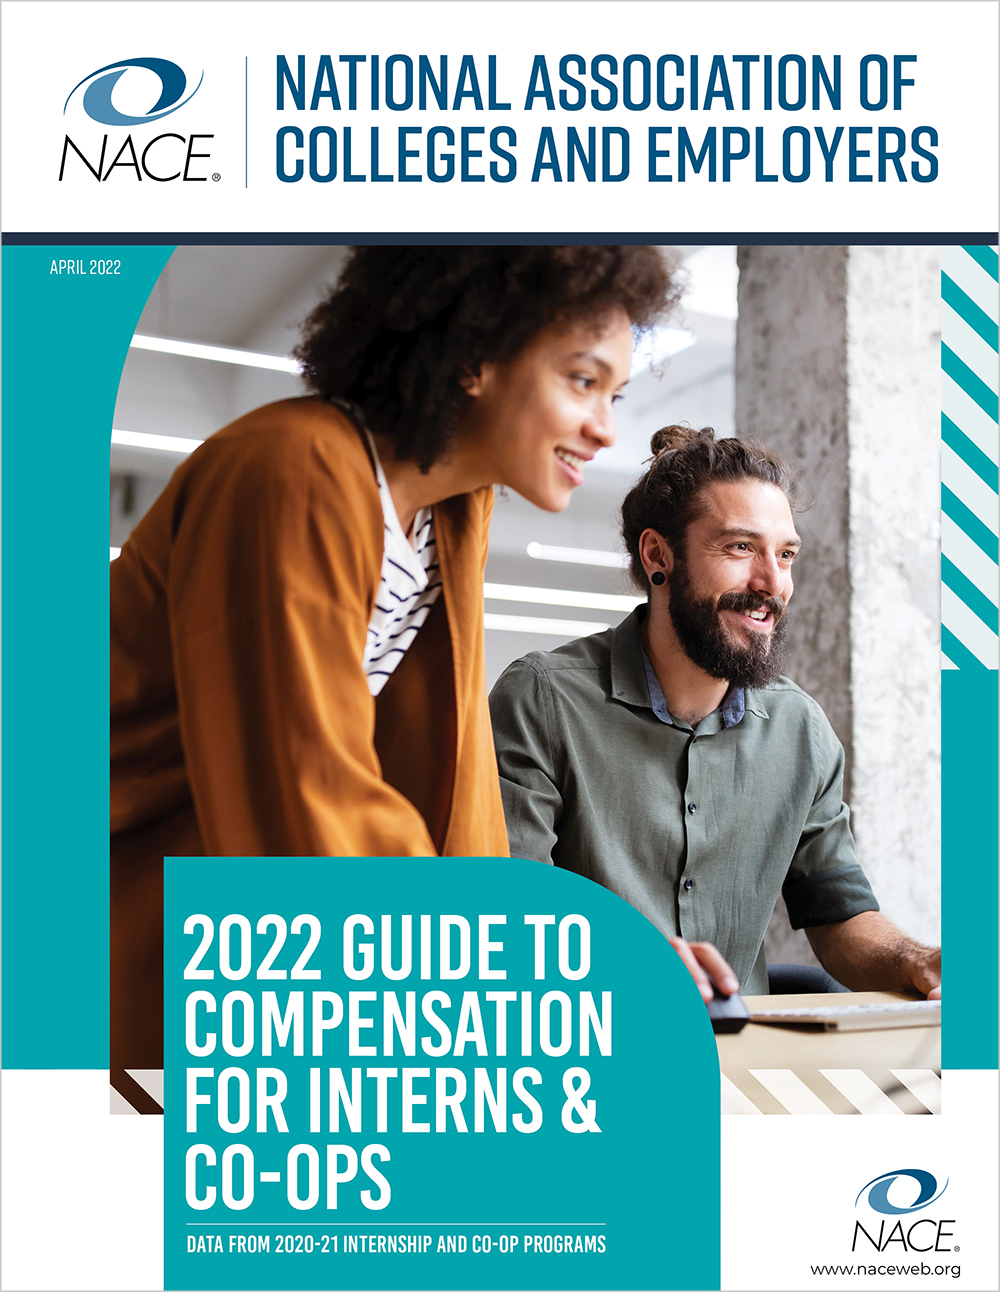 2022 Guide to Compensation for Interns & Co-ops Survey Report